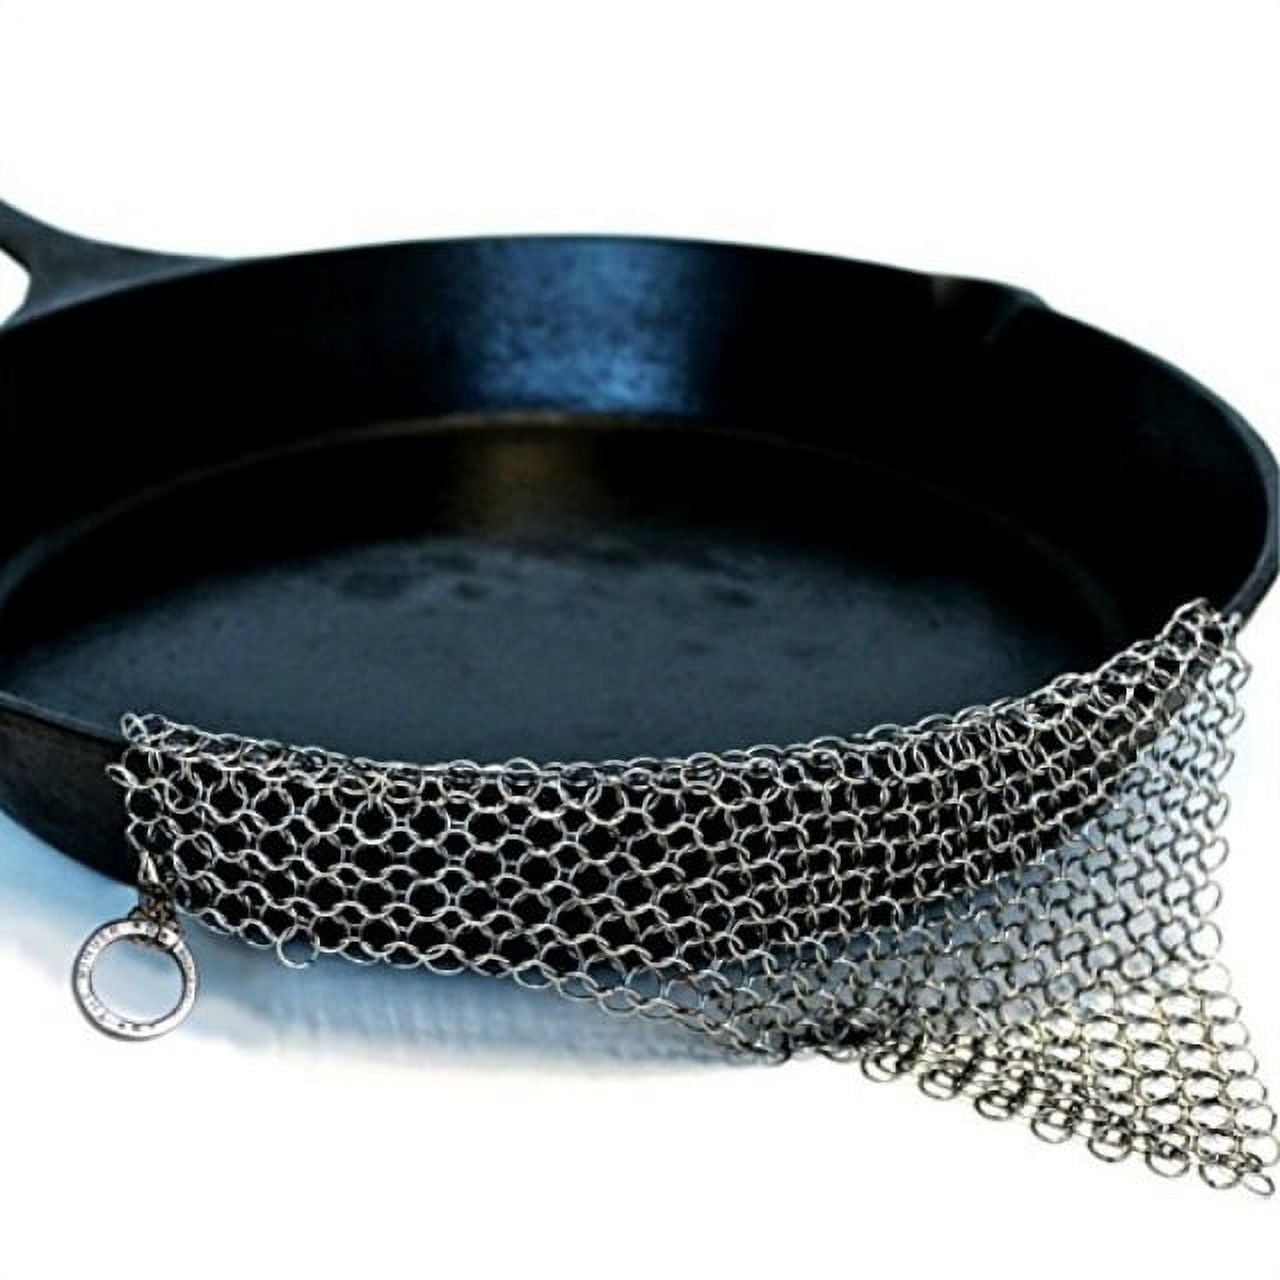 The Ringer The Original Stainless Steel Cast Iron Cleaner